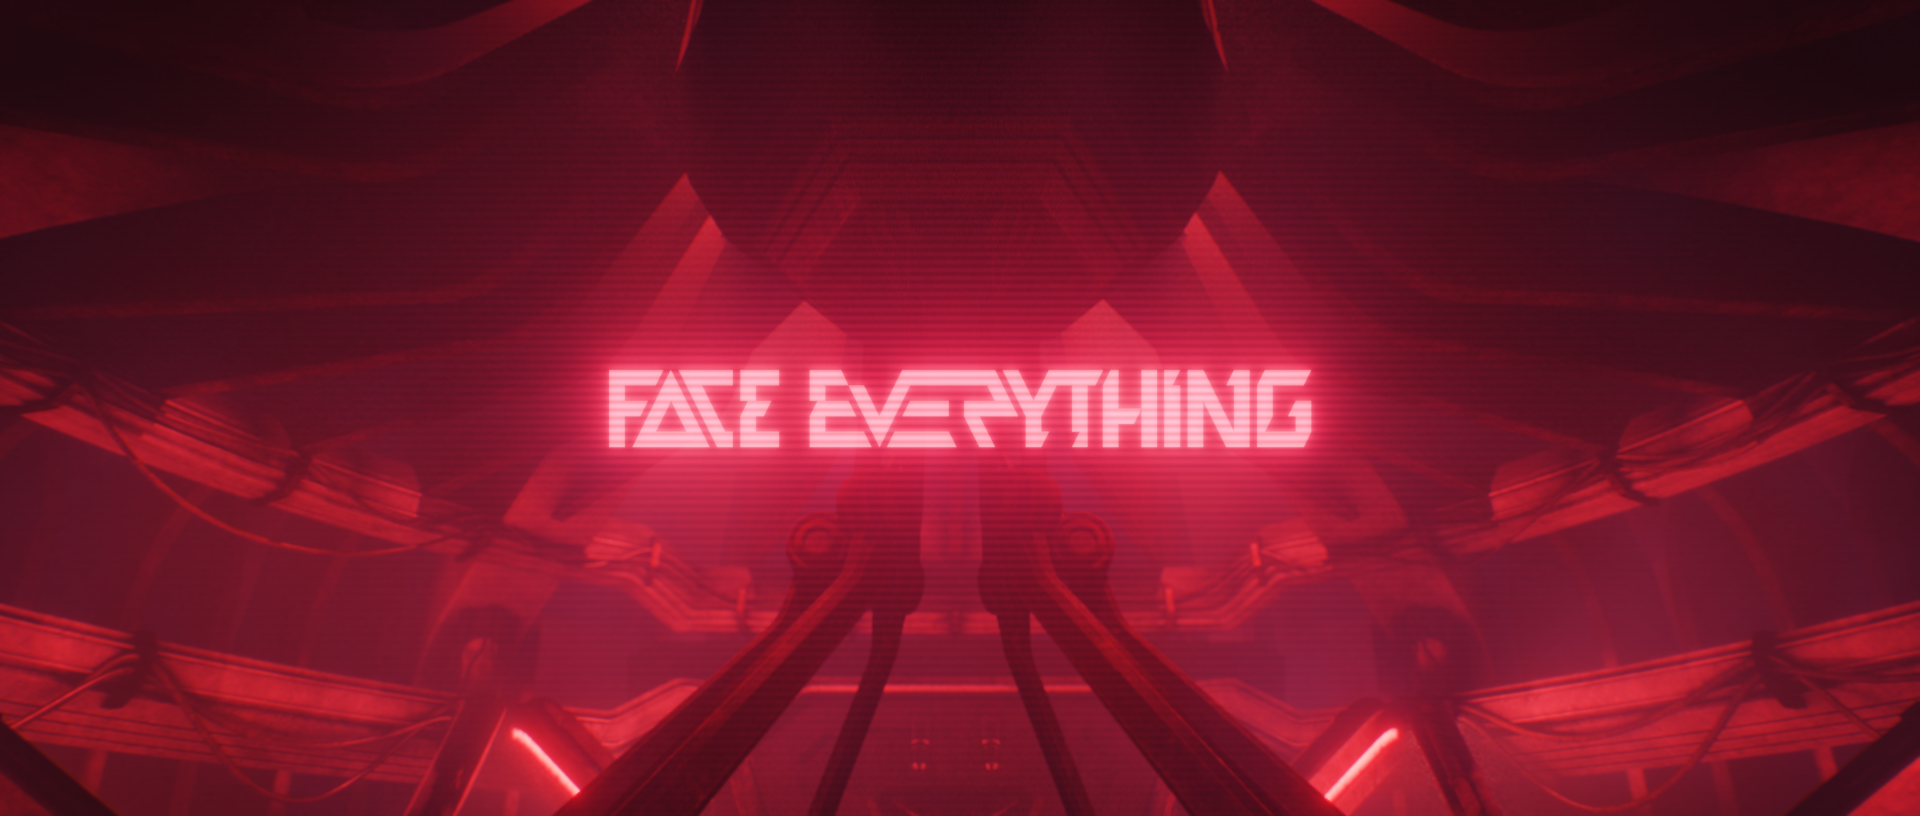 FACE EVERYTHING